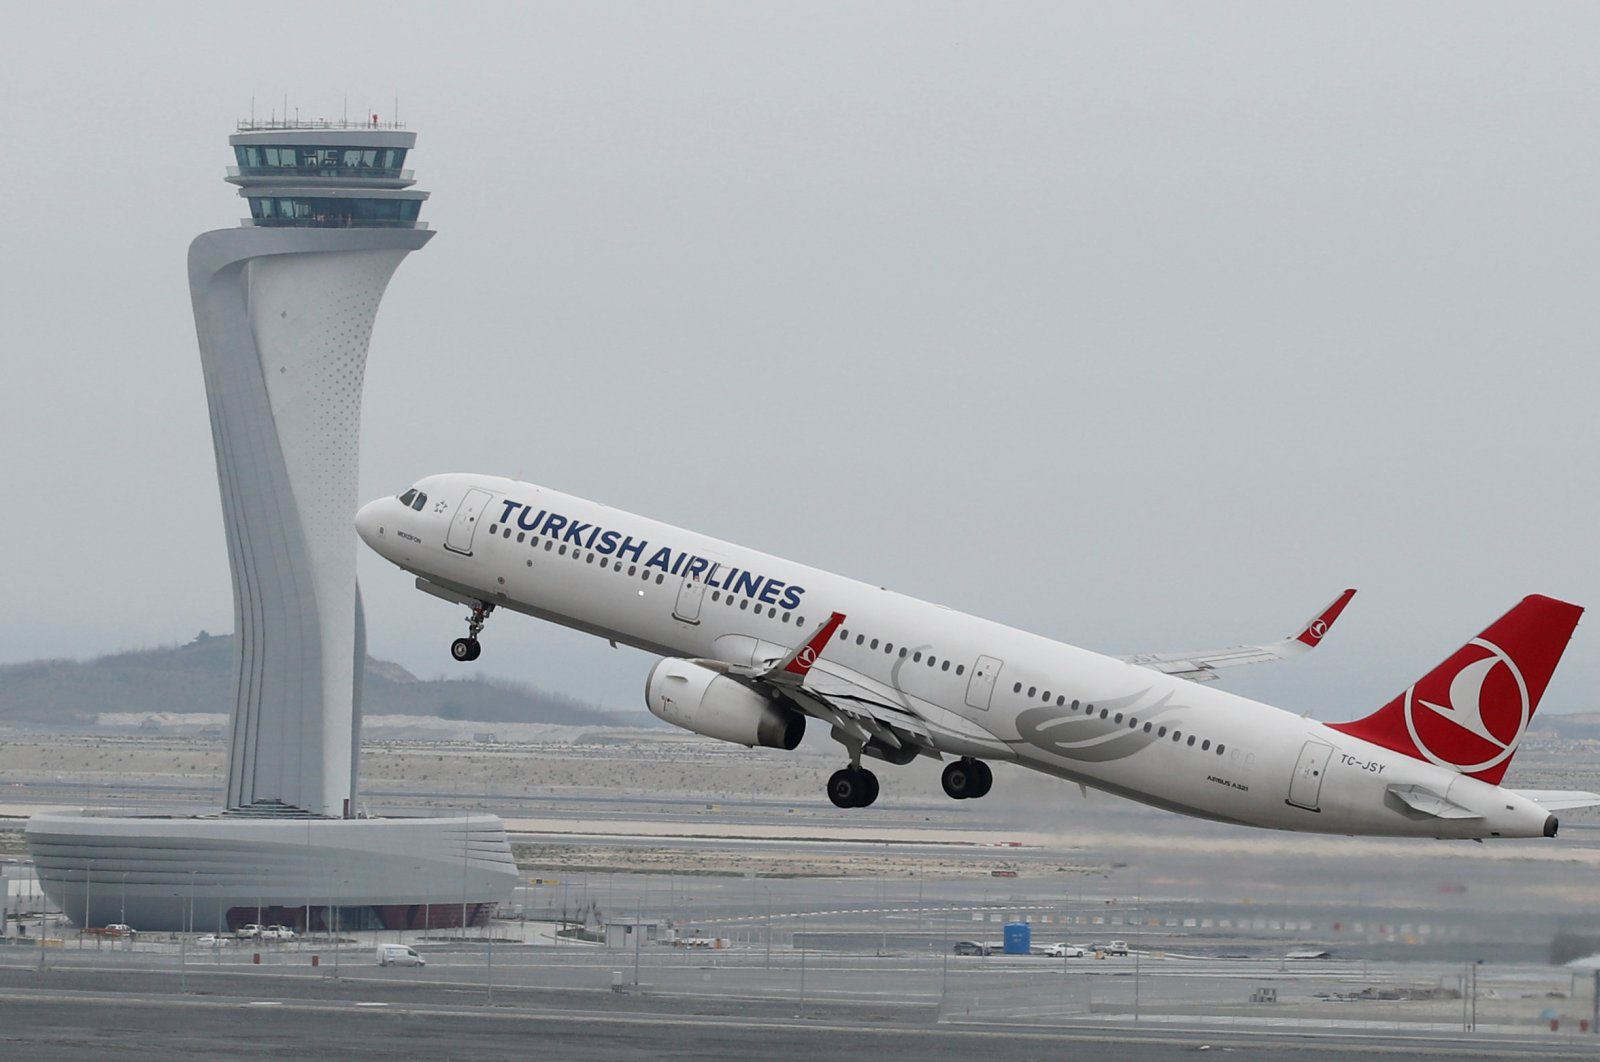 A Turkish Airlines Airbus A321-200 plane takes off from the city's new Istanbul Airport in Istanbul, Turkey, April 6, 2019. (Reuters Photo)